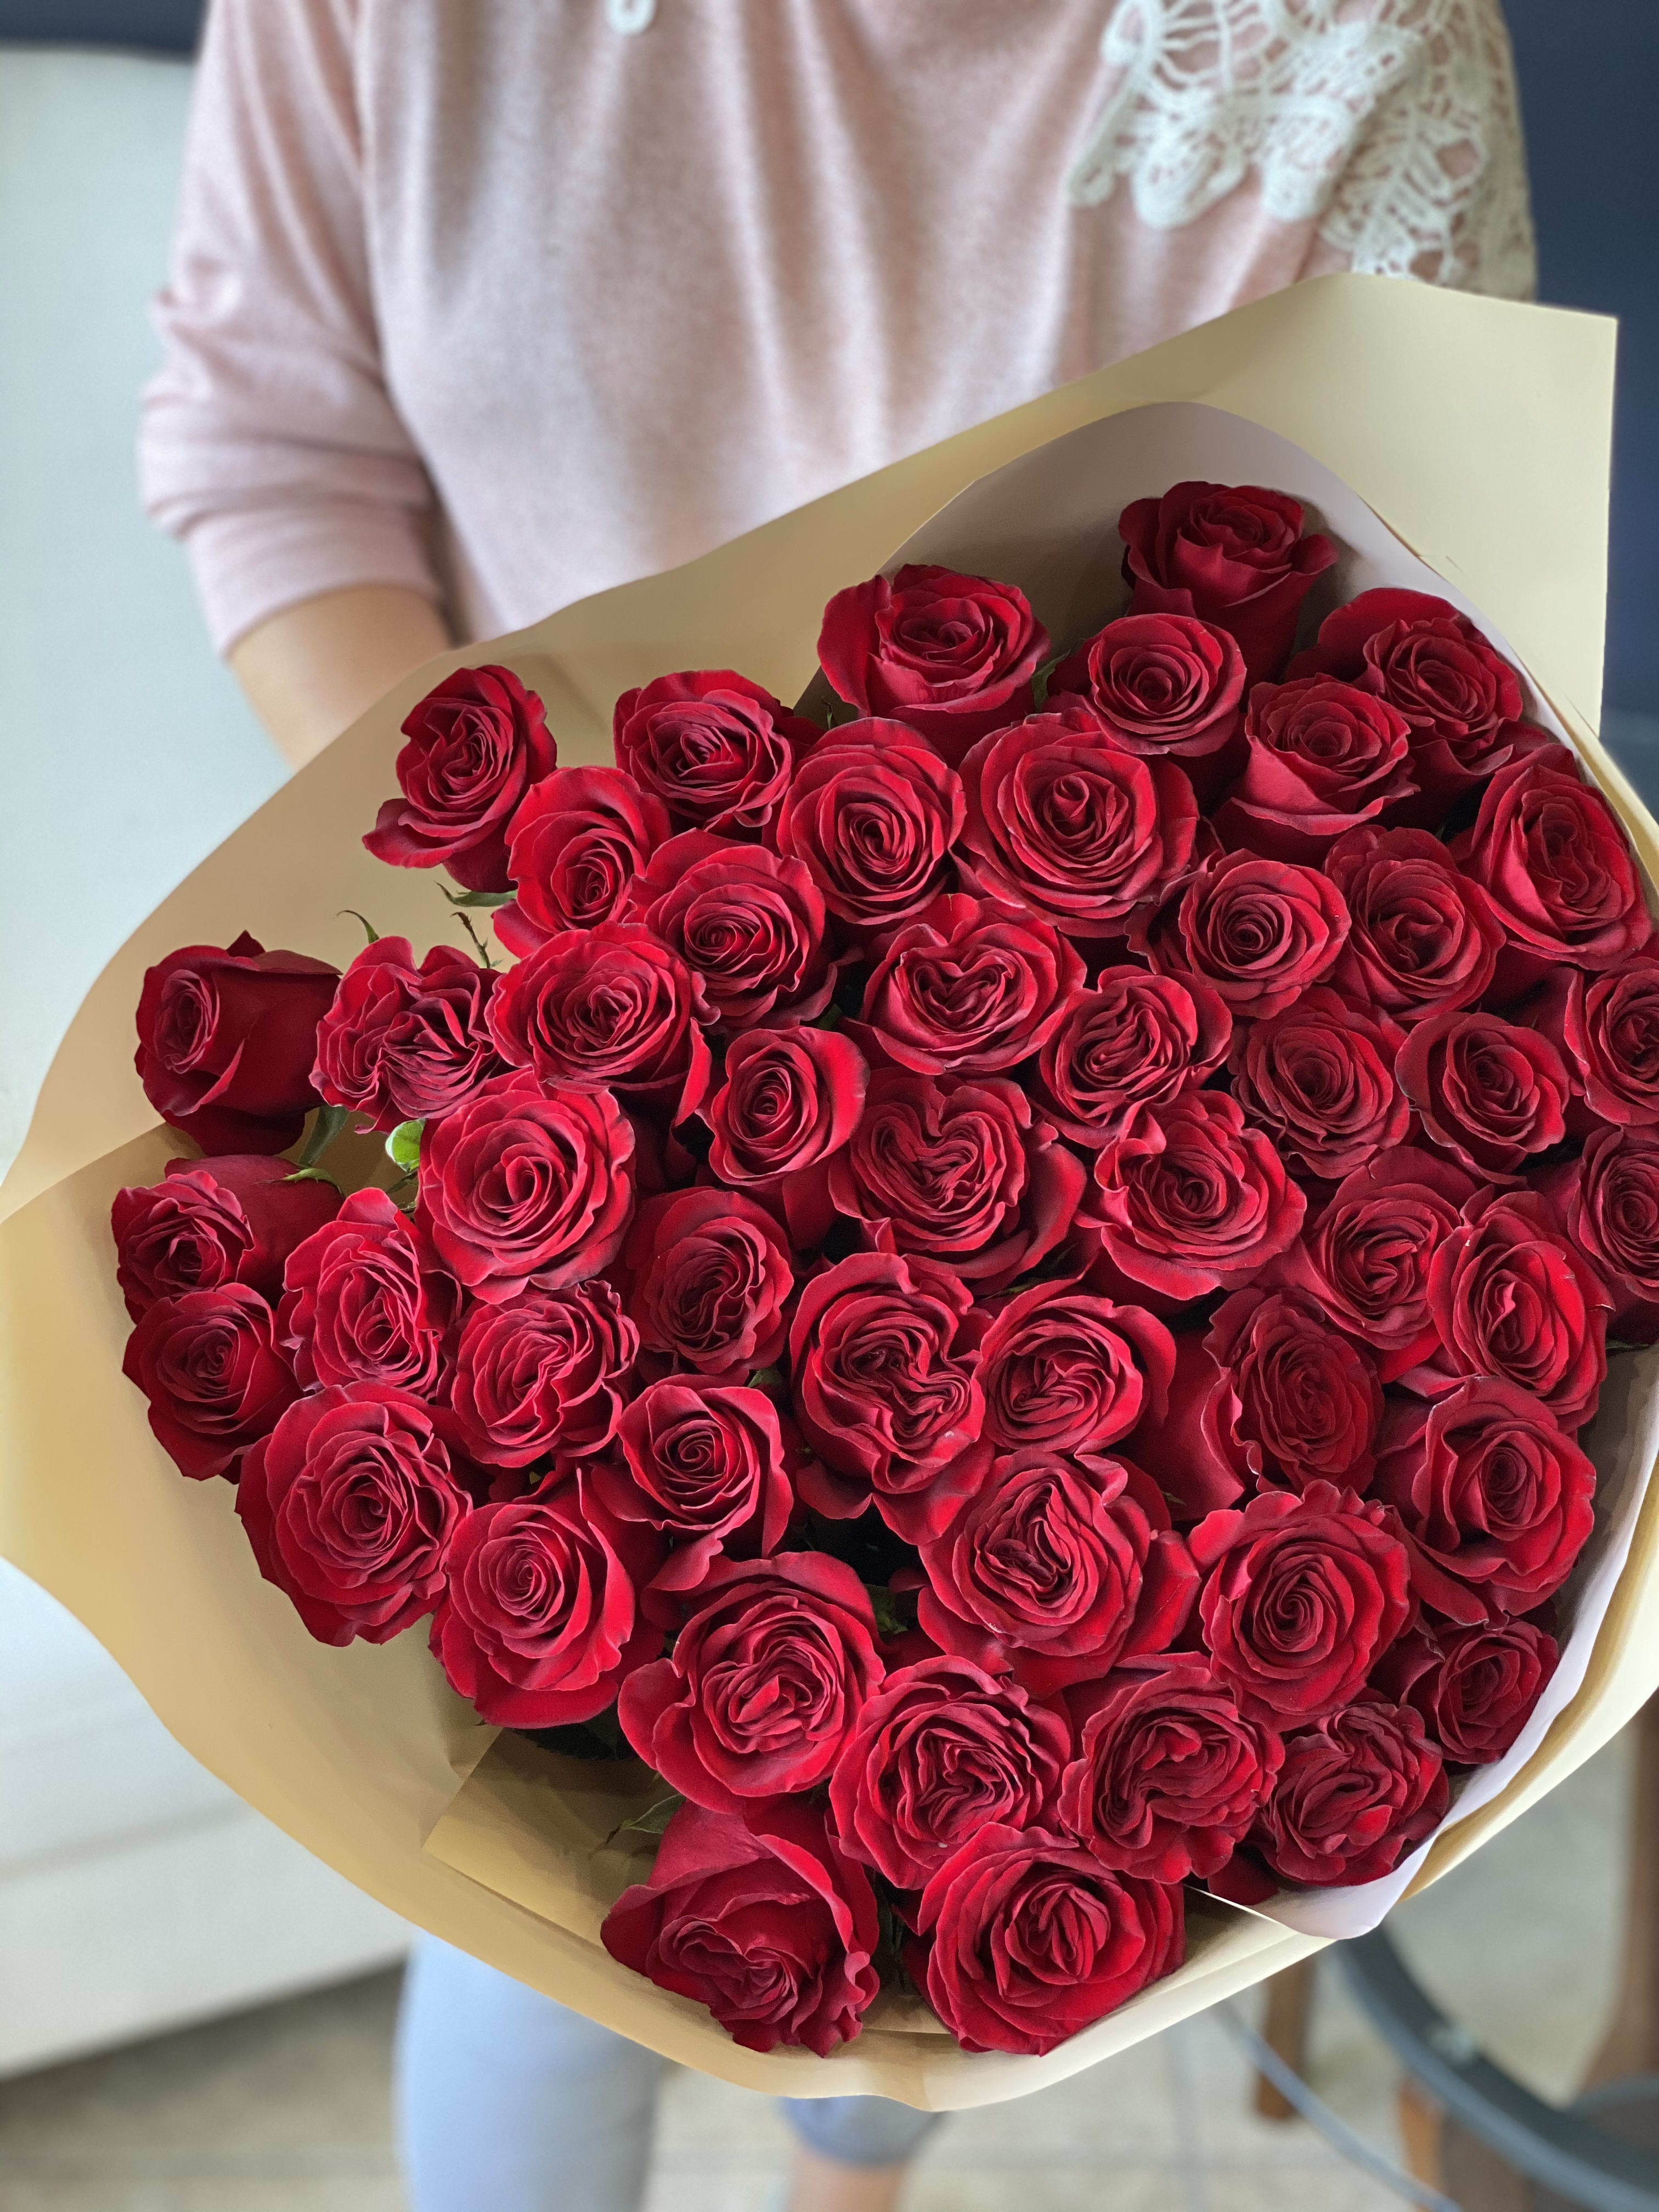 50 Red Roses Hand-crafted bouquet in Miami Beach, FL